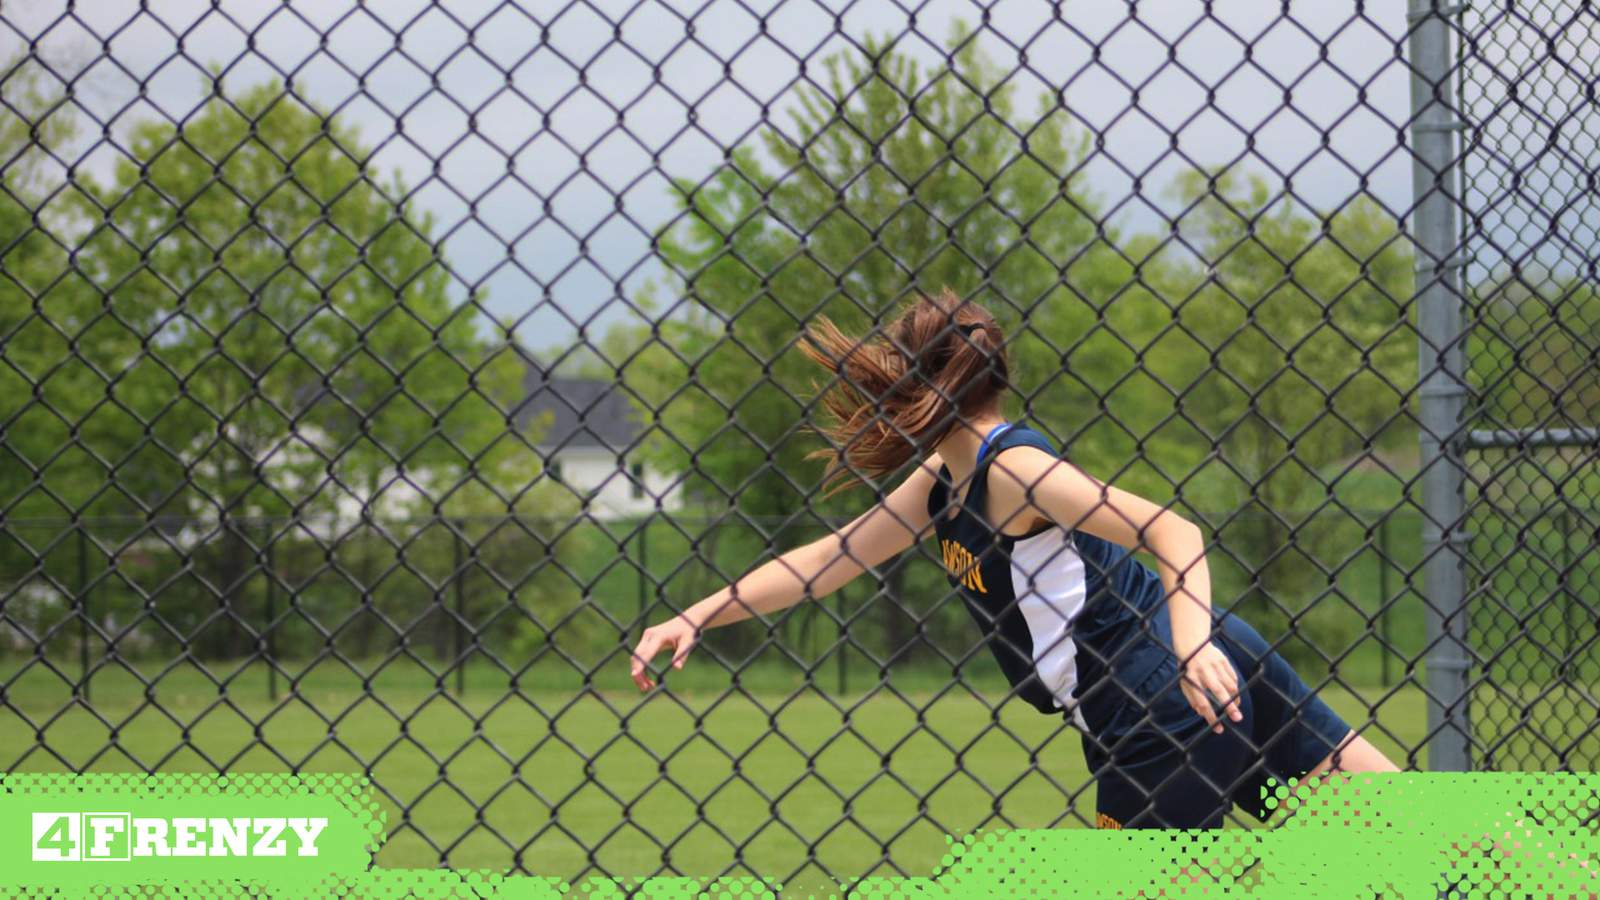 SPOTLIGHT: Clawson High School track star discovers her specialty by chance